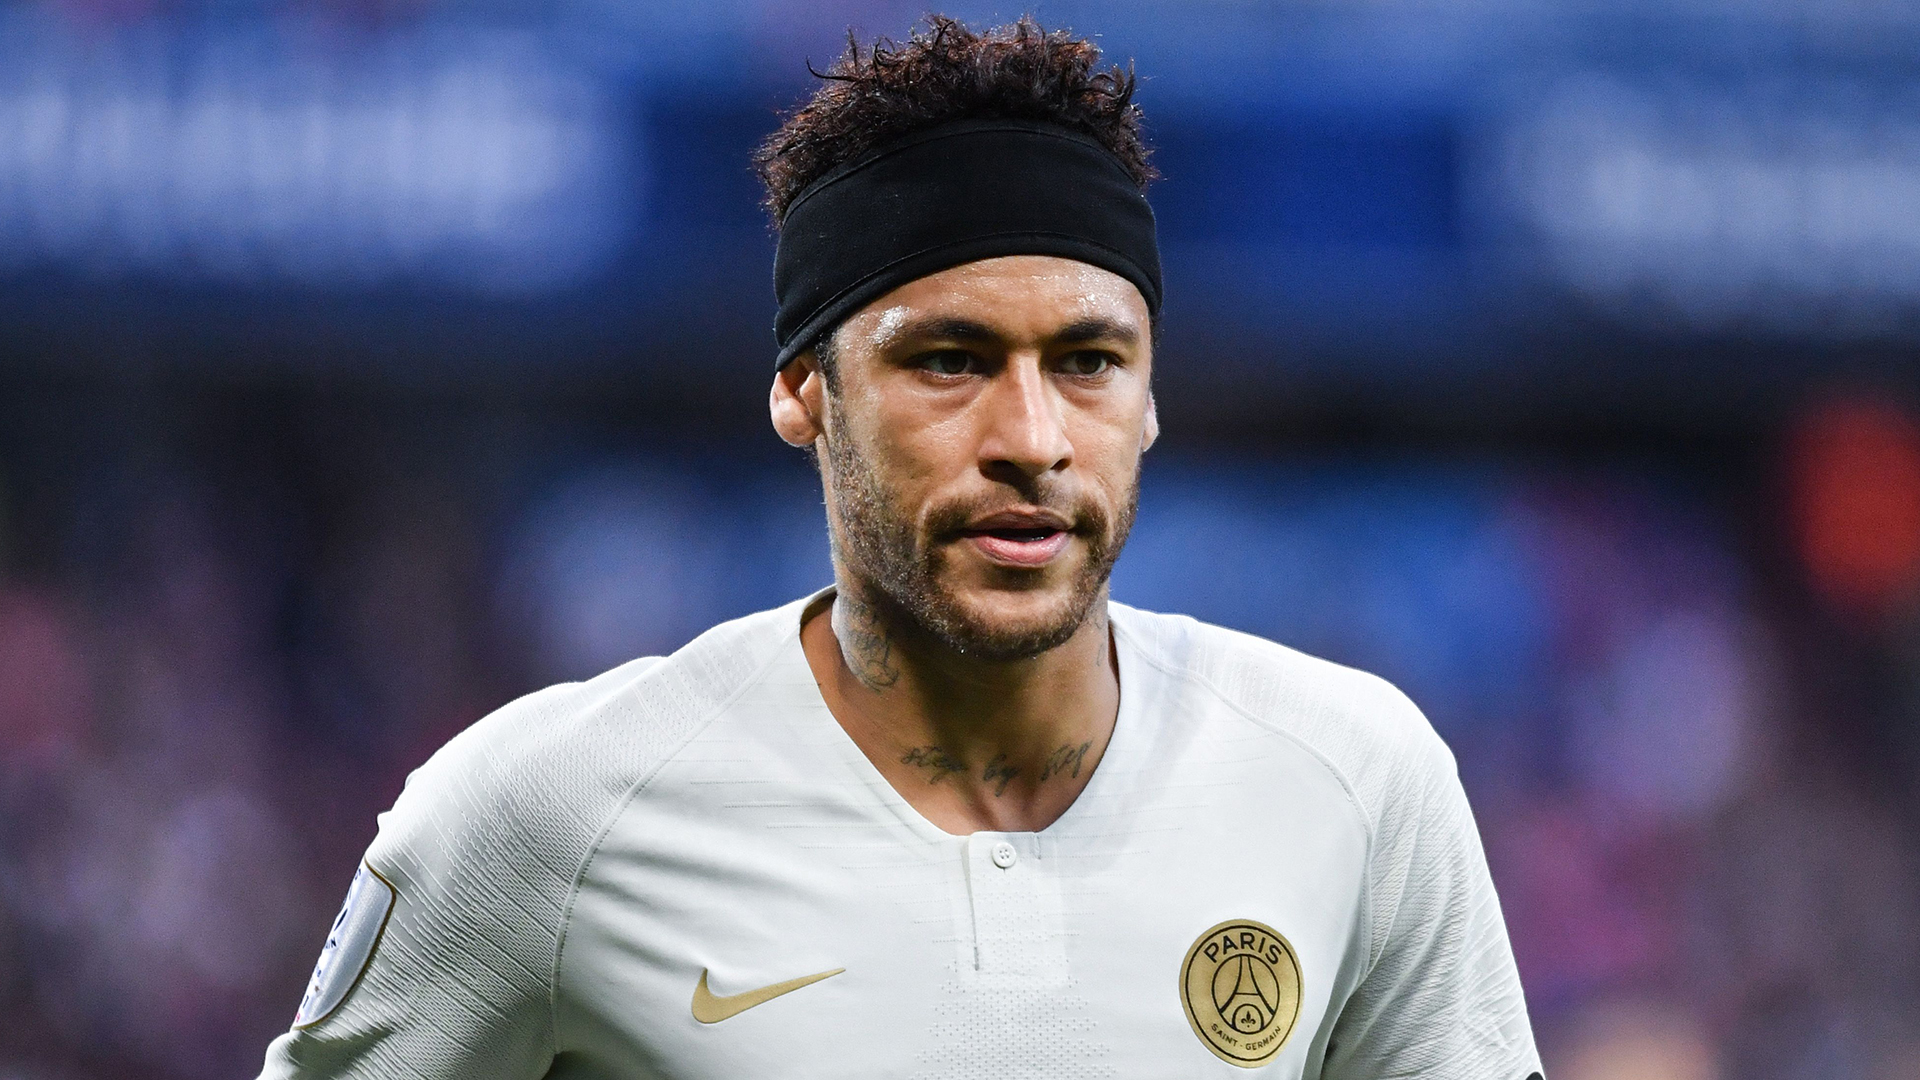 Neymar delivers message to PSG: 'I don't want to play there anymore, I will go back to my house' - Bóng Đá